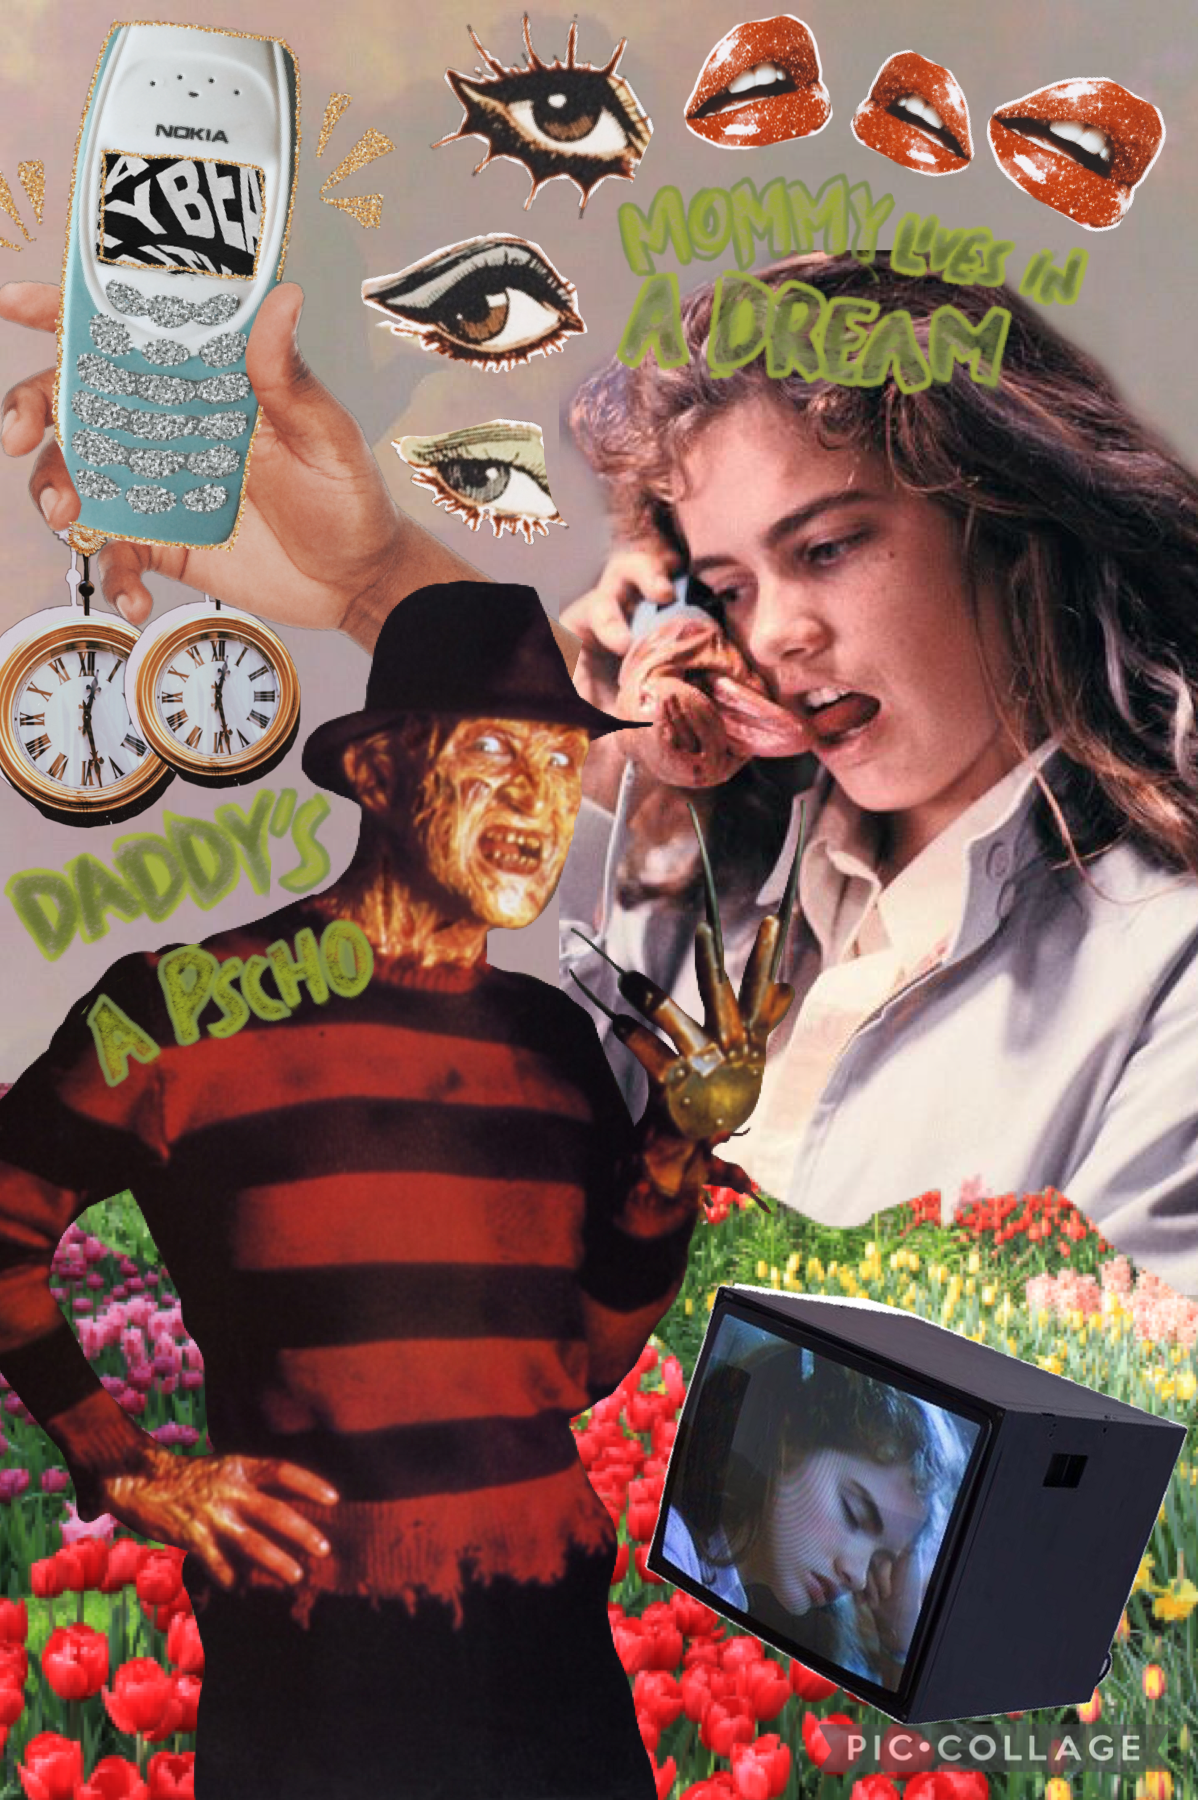 tap here! 🛌

this movie is one of
my favs horror movies
along with scream !
qotd: who are you dressing
up as for halloween?
model: freddy krueger &
nancy thompson